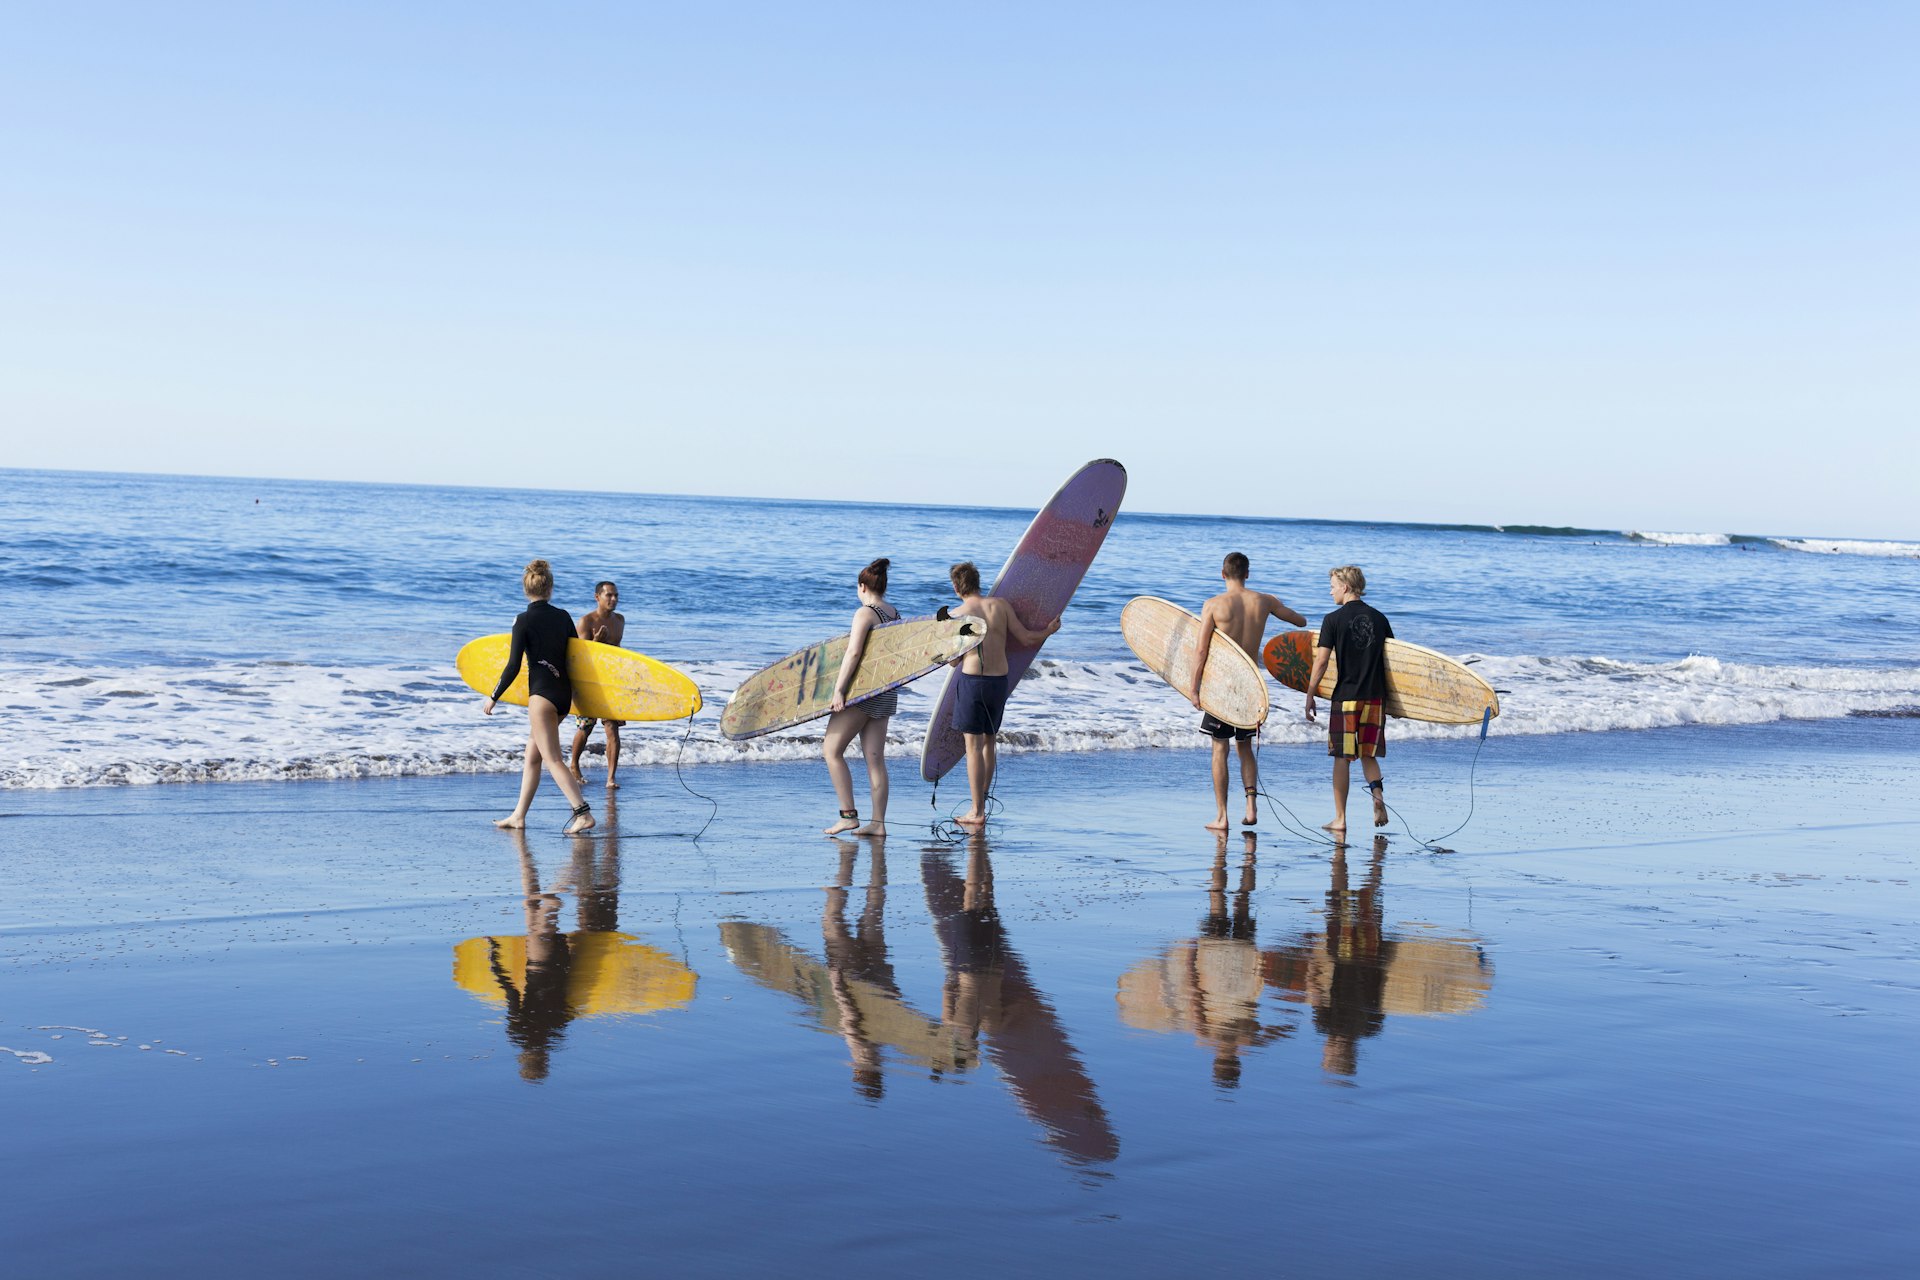 Tourist man and woman carrying a surf board and walking into the sea after finishing surf lesson in Playa El Tunco, El Salvador